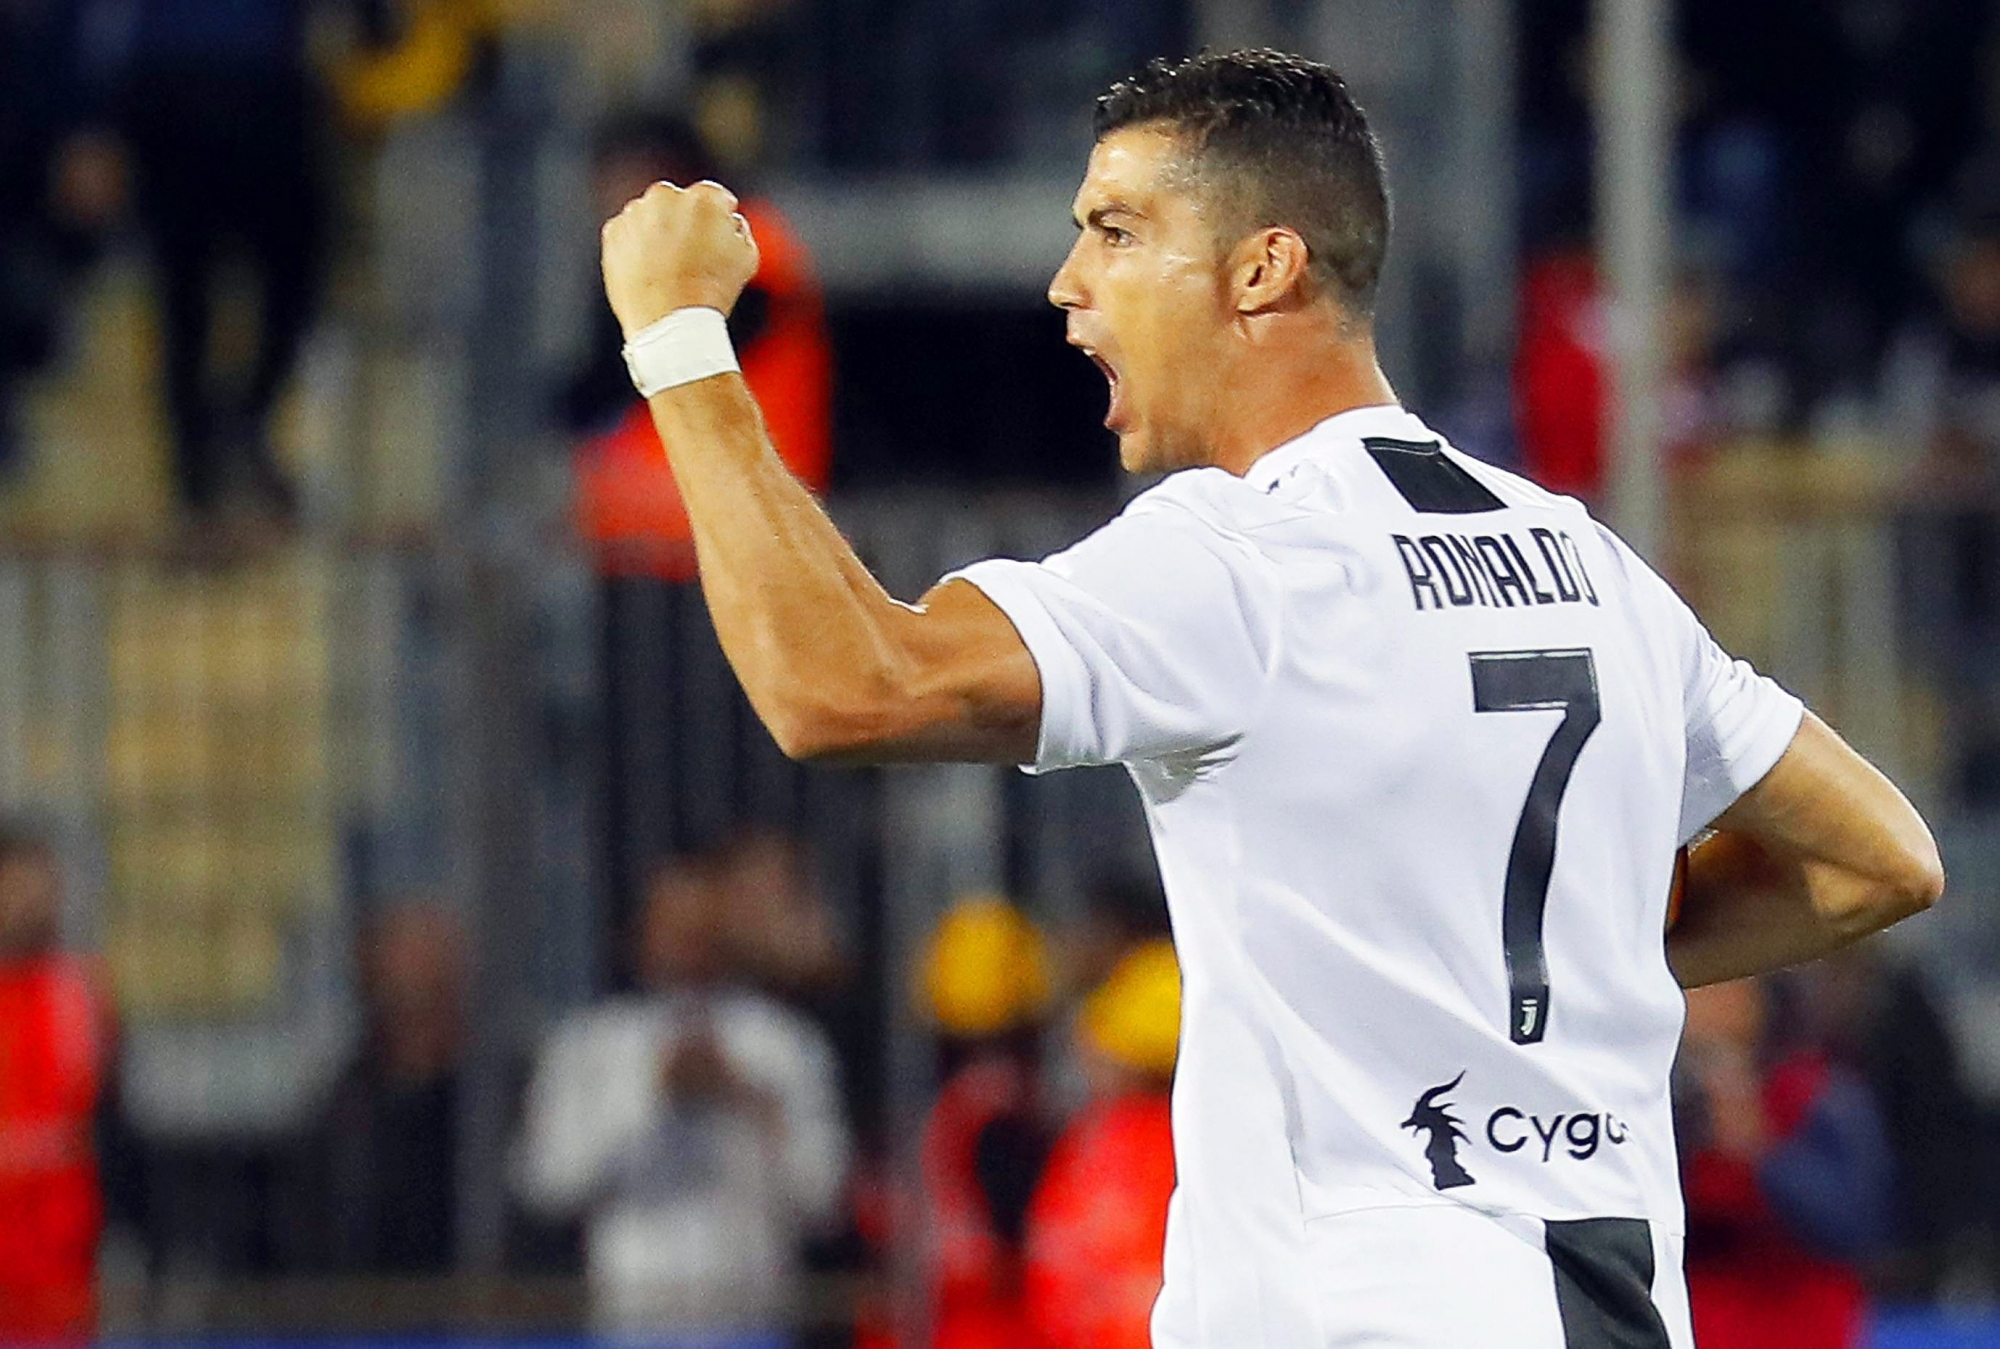 epa07124769 Juventus' forward Cristiano Ronaldo celebrates after scoring the 1-1 equalizer from the penalty spot during the Italian Serie A soccer match between Empoli FC and Juventus FC in Empoli, Italy, 27 October 2018.  EPA/FABIO MUZZI ITALY SOCCER SERIE A